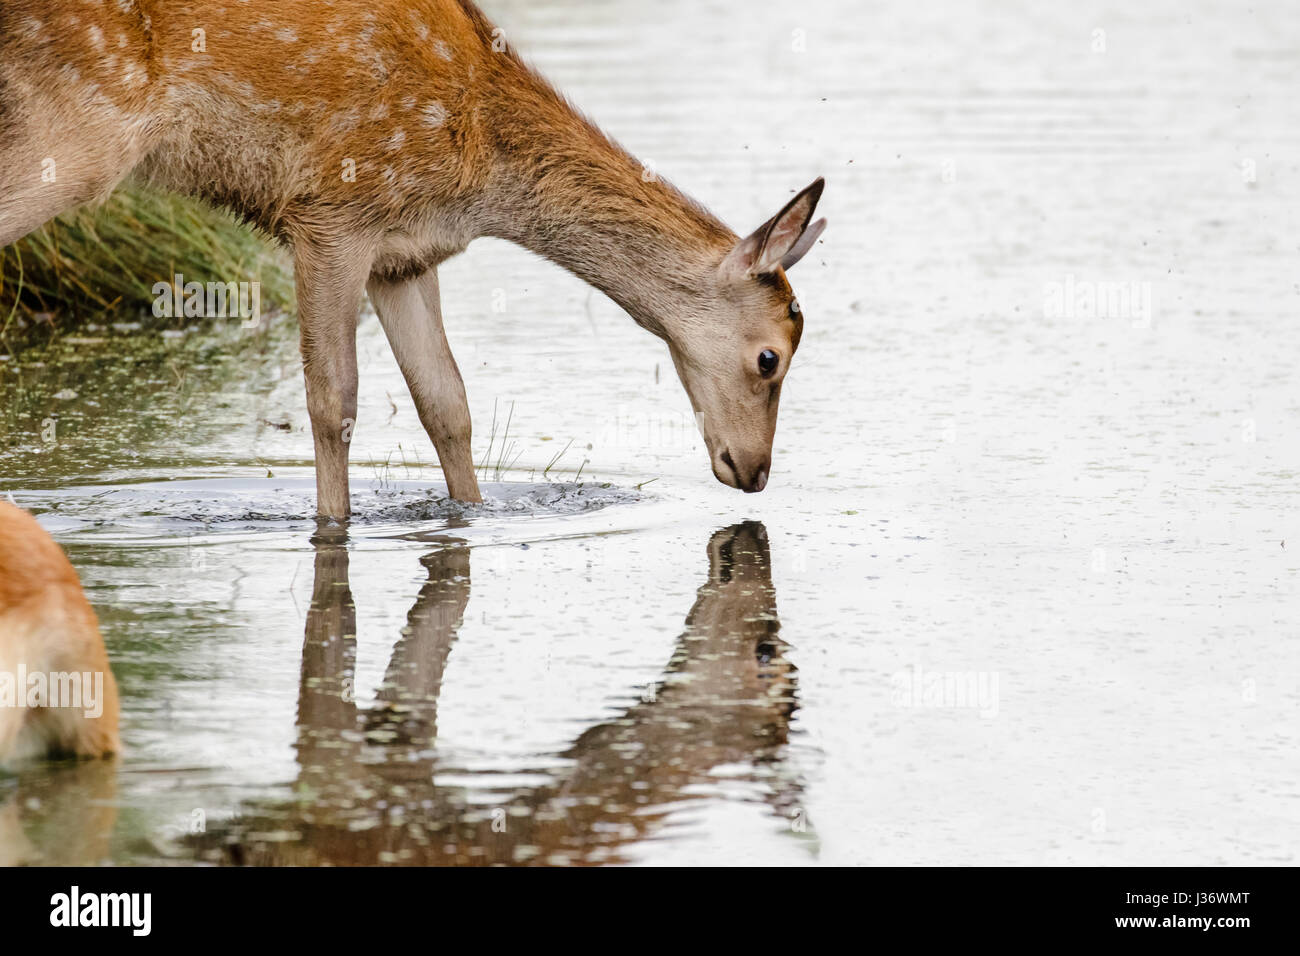 Red Deer young calf (Cervus elaphus) drinking and looking into stream or river reflection Stock Photo